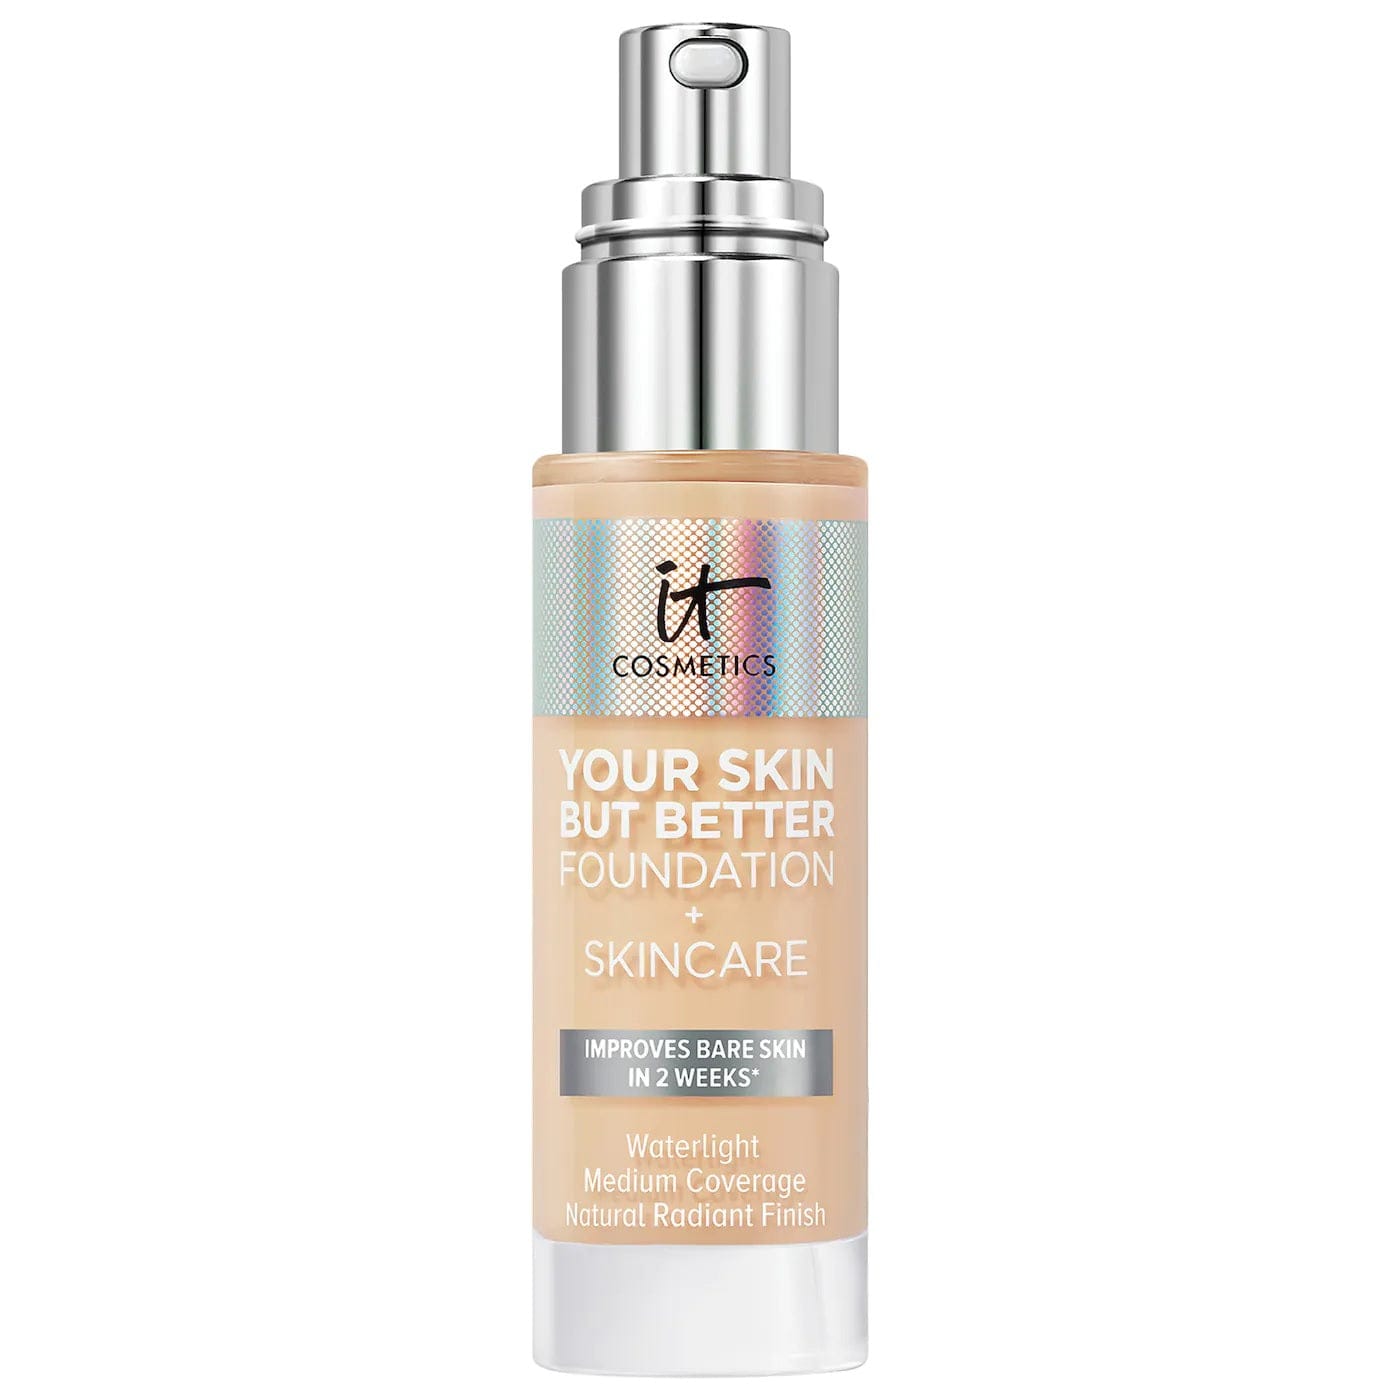 IT COSMETICS Beauty IT Cosmetics Your Skin But Better Foundation and Skincare 30ml - 21 Light Warm